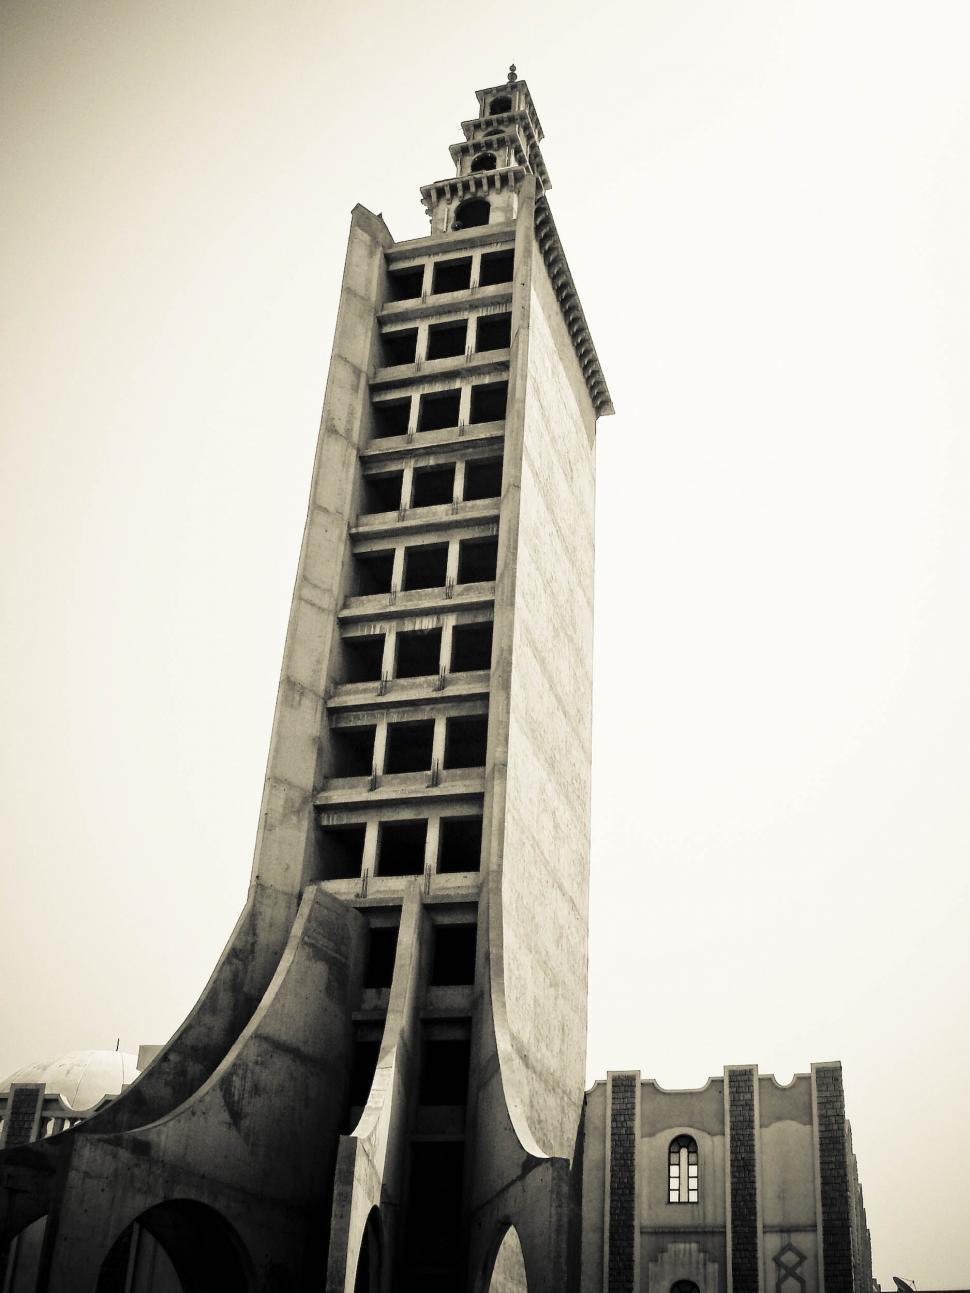 Free Image of Tower building in Tunisia 